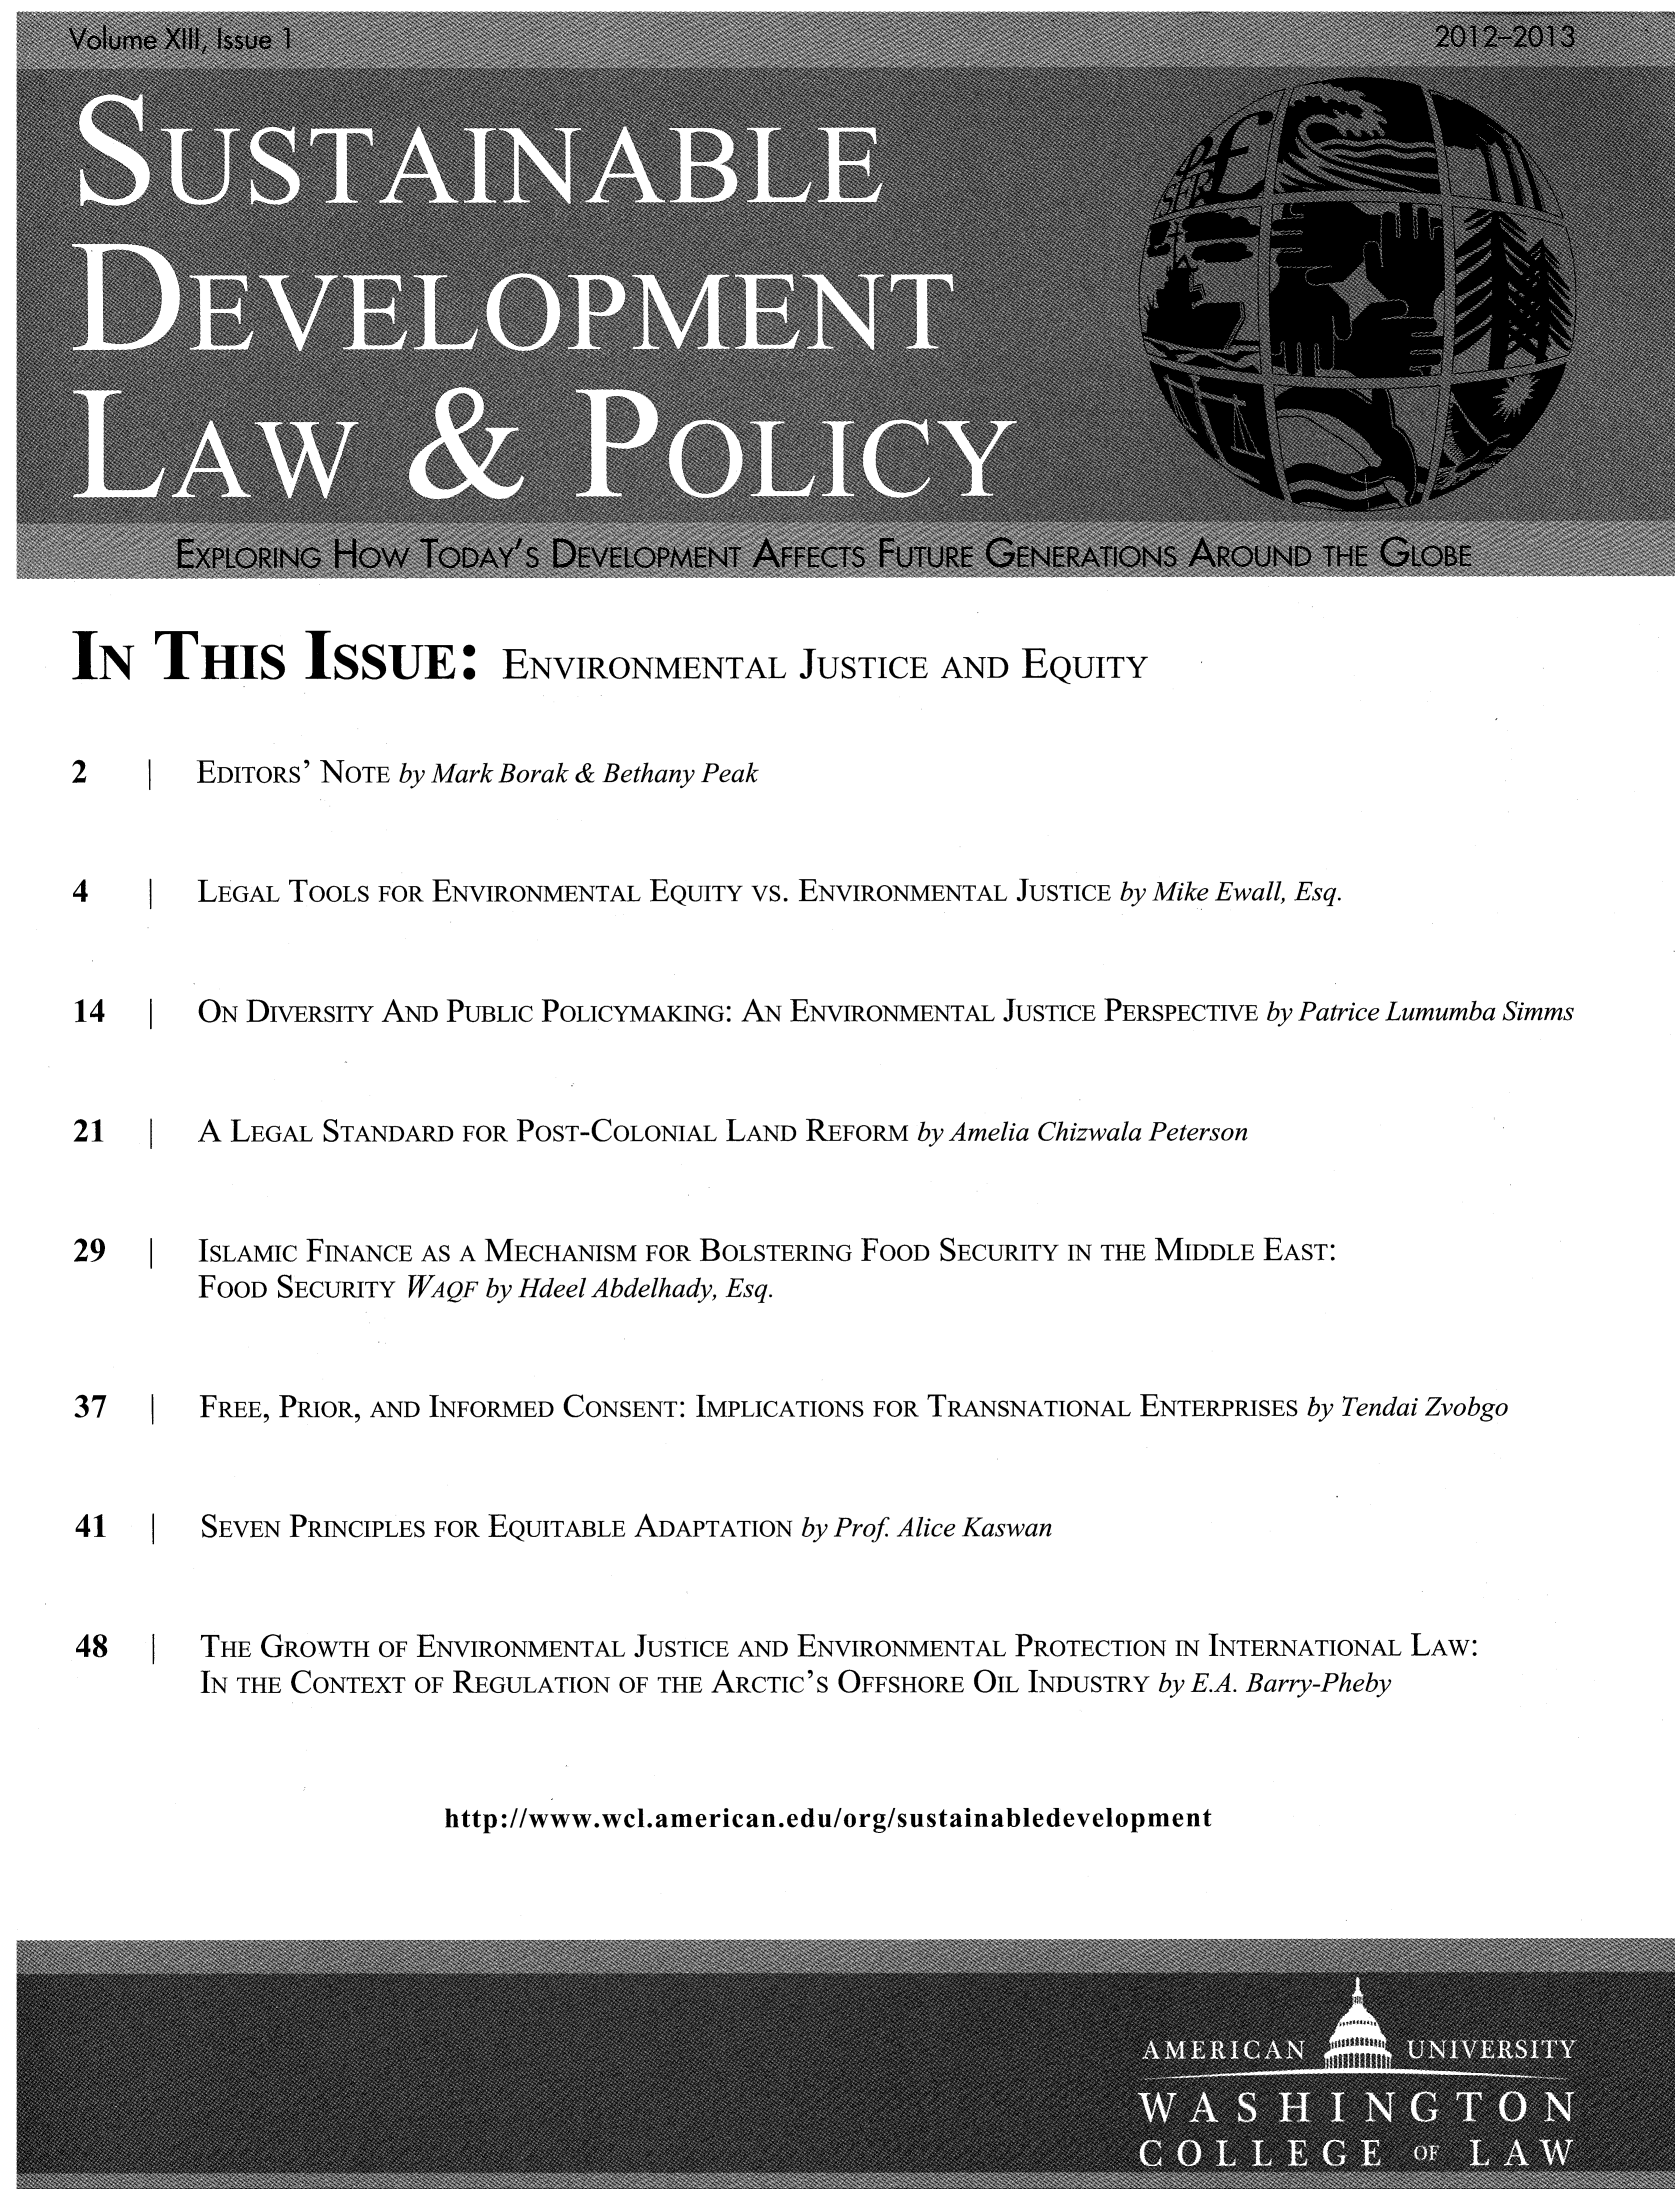 handle is hein.journals/sdlp13 and id is 1 raw text is: IN THIS ISSUE: ENVIRONMENTAL JUSTICE AND EQUITY
2    I EDITORS' NOTE by Mark Borak & Bethany Peak
4       LEGAL TOOLS FOR ENVIRONMENTAL EQUITY vs. ENVIRONMENTAL JUSTICE by Mike Ewall, Esq.
14      ON DIVERSITY AND PUBLIC POLICYMAKING: AN ENVIRONMENTAL JUSTICE PERSPECTIVE by Patrice Lumumba Simms
21      A LEGAL STANDARD FOR POST-COLONIAL LAND REFORM by Amelia Chizwala Peterson
29     ISLAMIC FINANCE AS A MECHANISM FOR BOLSTERING FOOD SECURITY IN THE MIDDLE EAST:
FOOD SECURITY WAQF by Hdeel Abdelhady, Esq.
37      FREE, PRIOR, AND INFORMED CONSENT: IMPLICATIONS FOR TRANSNATIONAL ENTERPRISES by Tendai Zvobgo
41      SEVEN PRINCIPLES FOR EQUITABLE ADAPTATION by Prof Alice Kaswan
48      THE GROWTH OF ENVIRONMENTAL JUSTICE AND ENVIRONMENTAL PROTECTION IN INTERNATIONAL LAW:
IN THE CONTEXT OF REGULATION OF THE ARCTIC'S OFFSHORE OIL INDUSTRY by E.A. Barry-Pheby

http://www.wcl.american.edu/org/sustainabledevelopment


